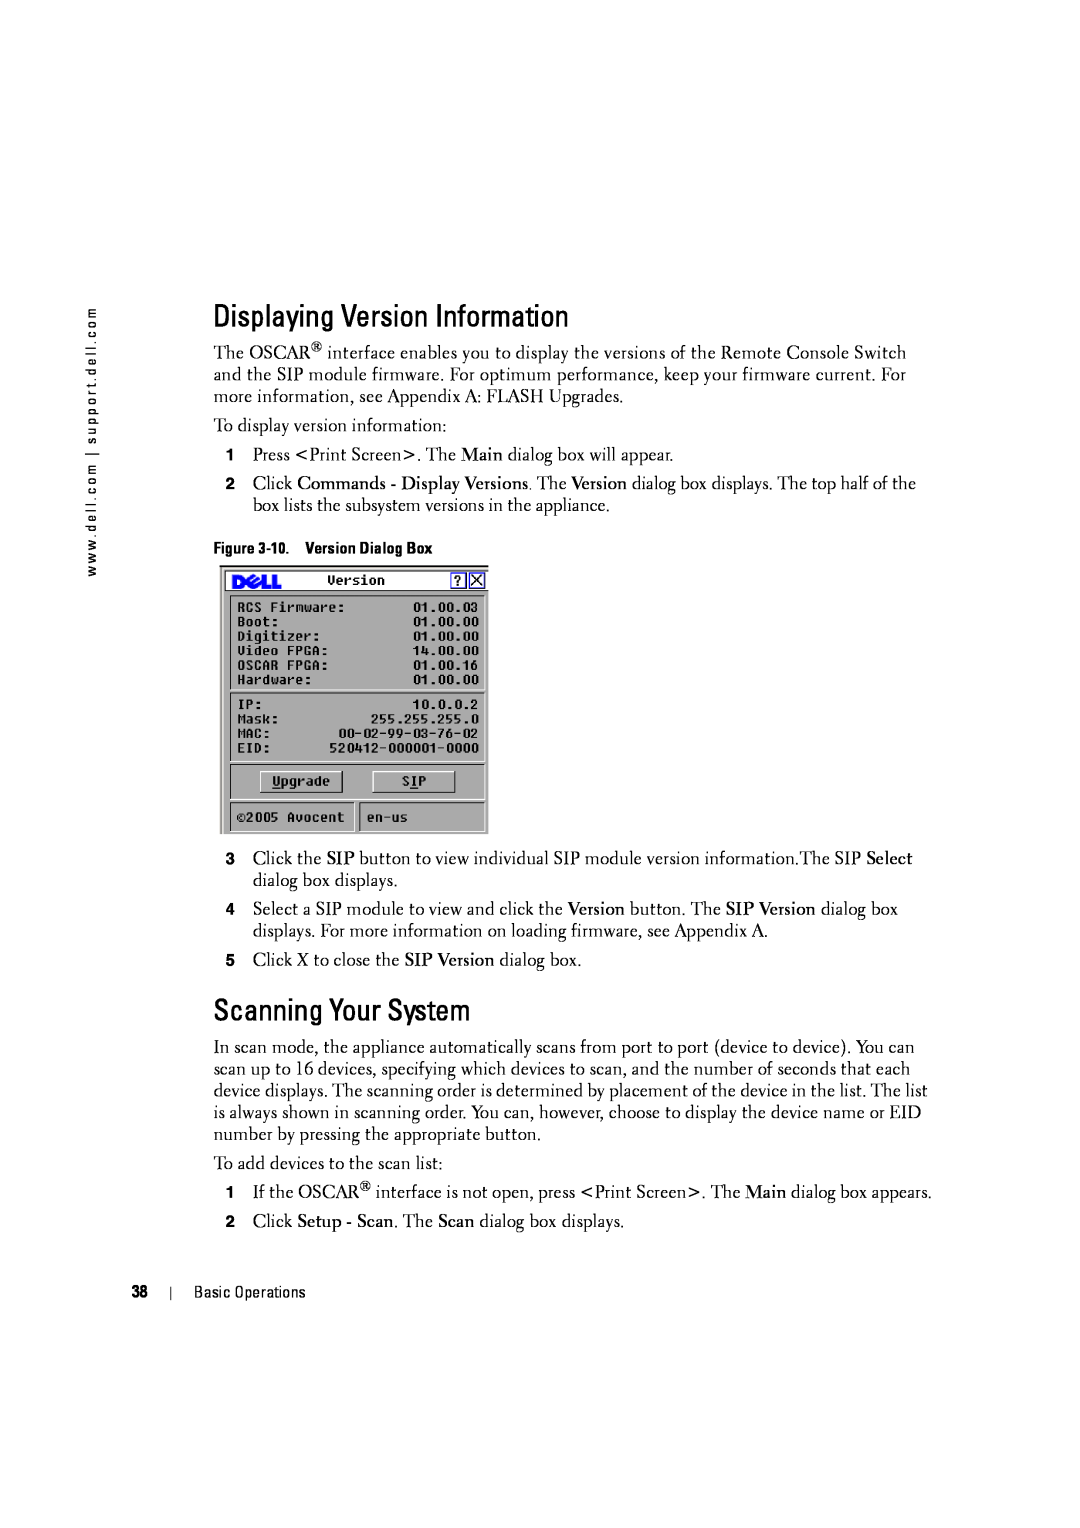 Dell 4161DS, 2161DS-2 manual Displaying Version Information, Scanning Your System, 10. Version Dialog Box 